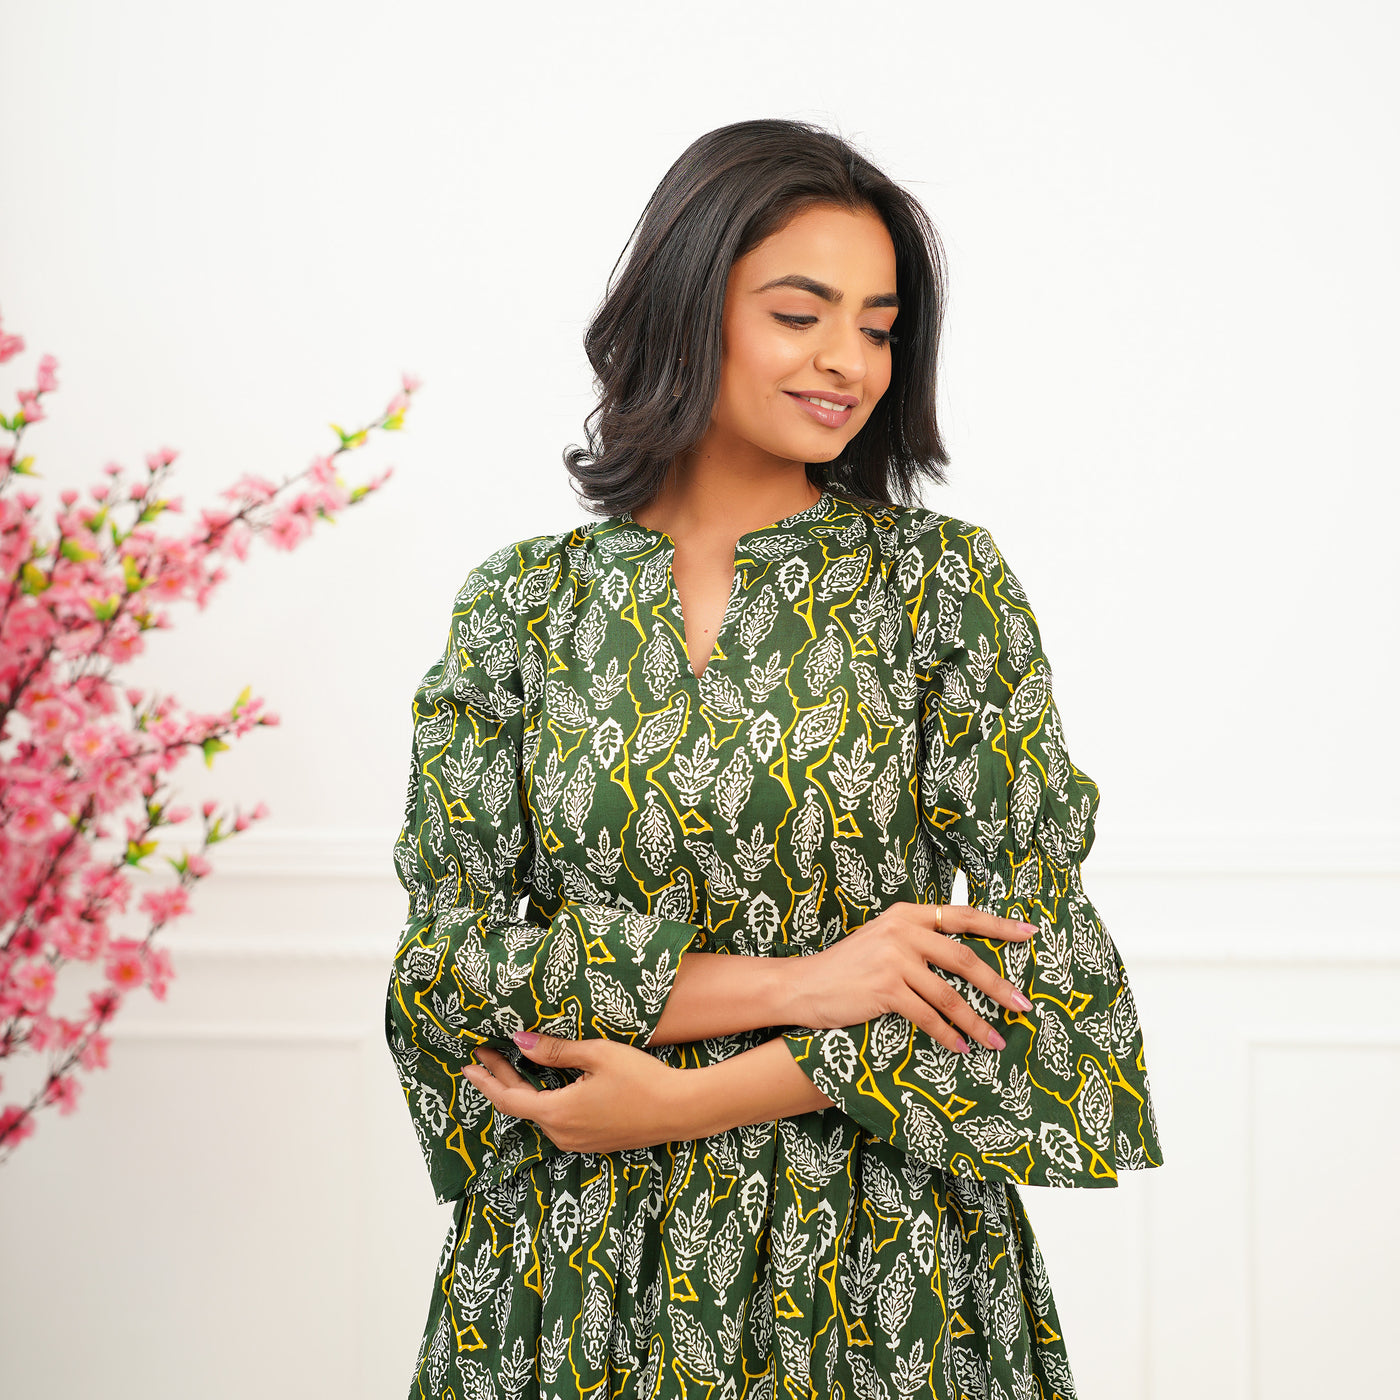 'Green Oasis' Cotton Midi Dress with Pockets